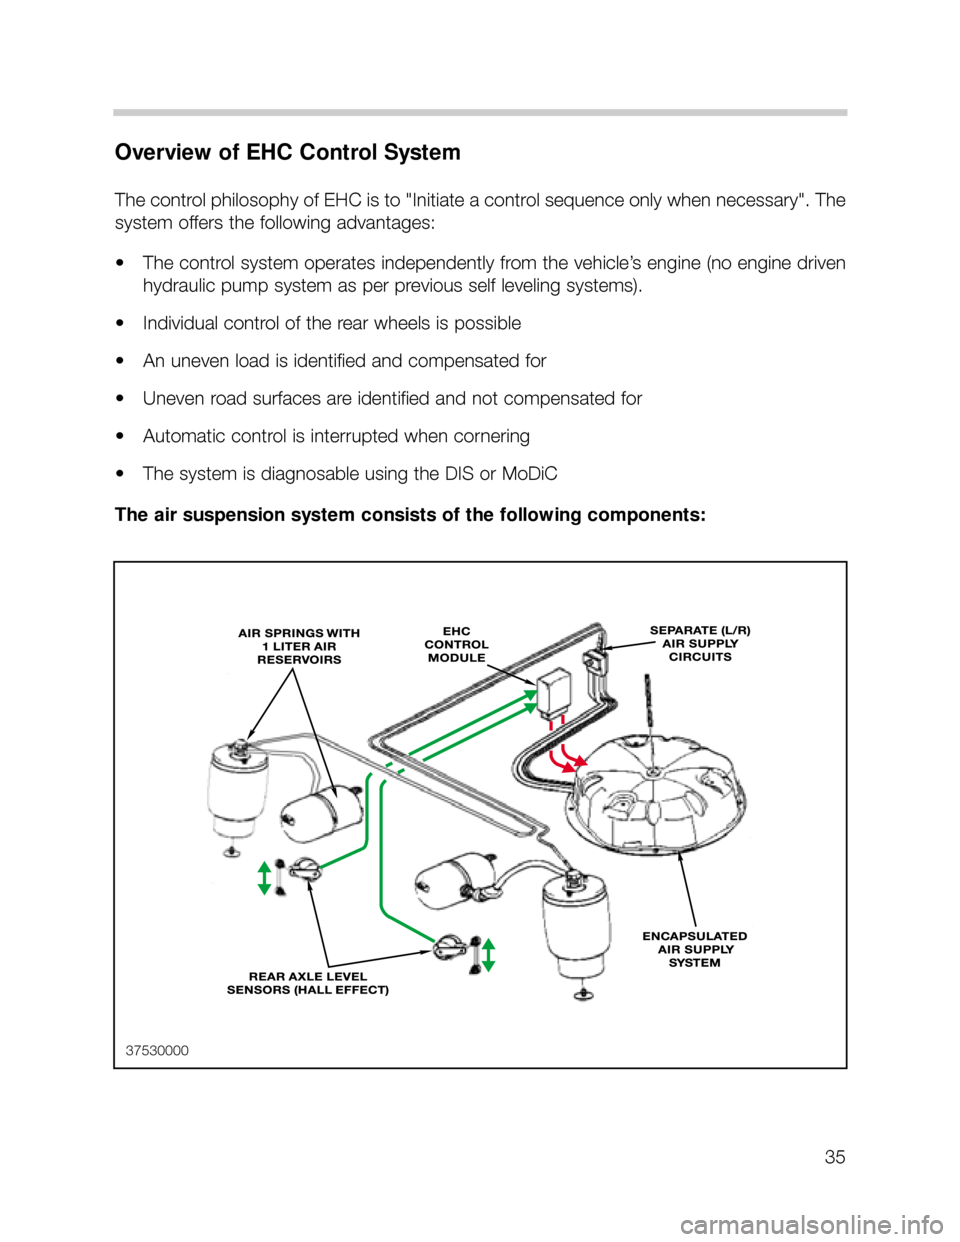 BMW X5 2001 E53 Owners Guide 35
Overview of EHC Control System
The control philosophy of EHC is to "Initiate a control sequence only when necessary". The
system offers the following advantages:
• The control system operates ind